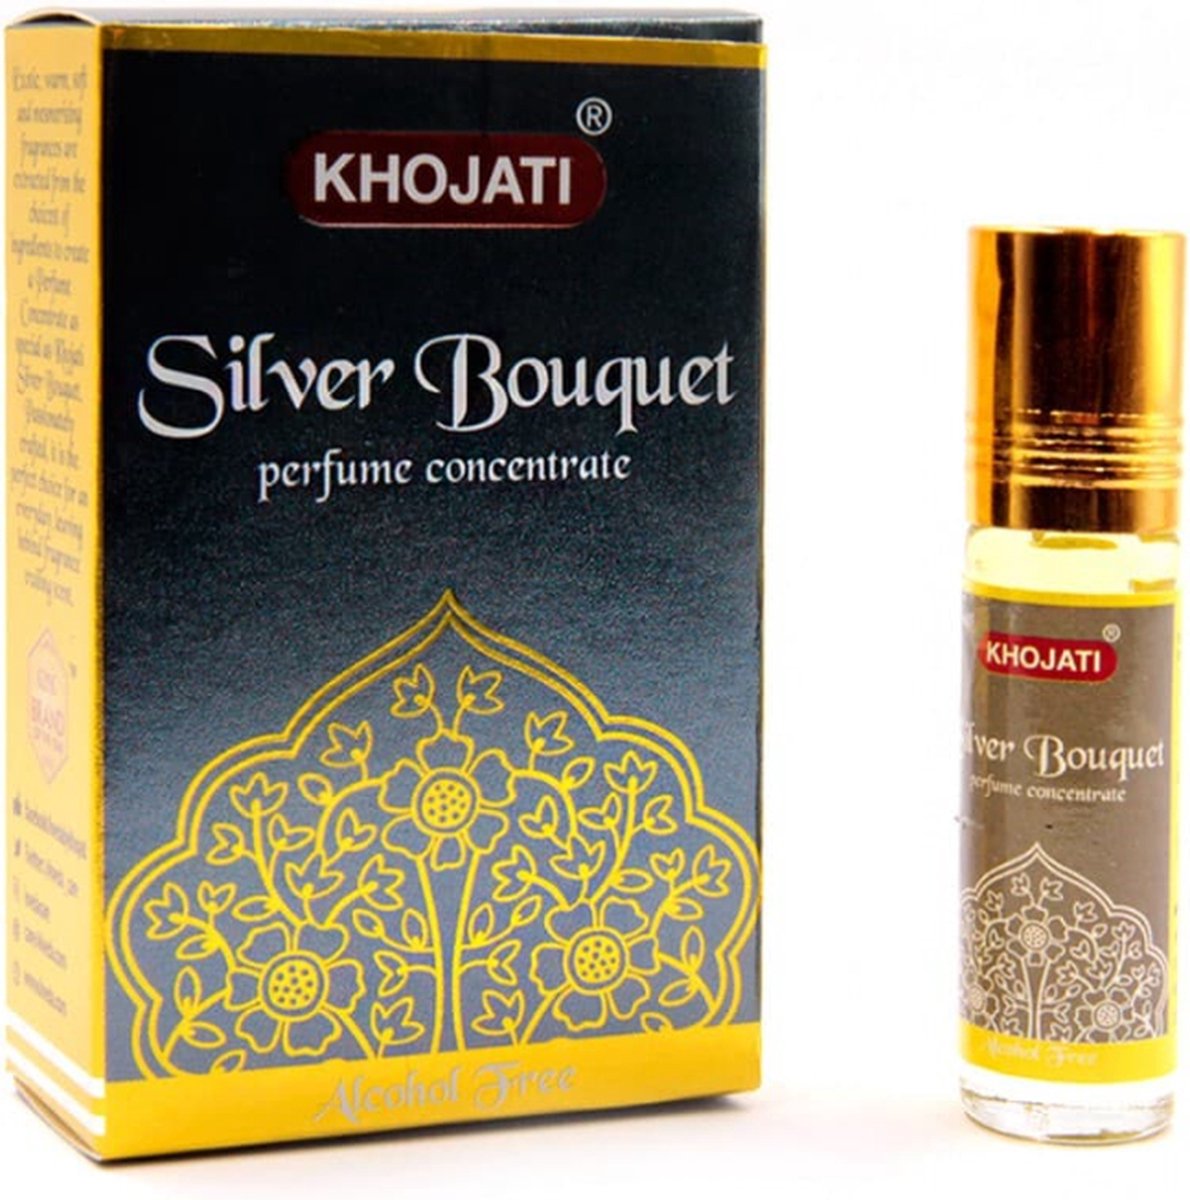 K-Veda - Silver Bouquet Perfume Concentrate - 6ml - Alcohol-Free - Exotic, Warm, and Mesmerizing Fragrance - Experience Everyday Elegance with the Special Scent of Silver Bouquet